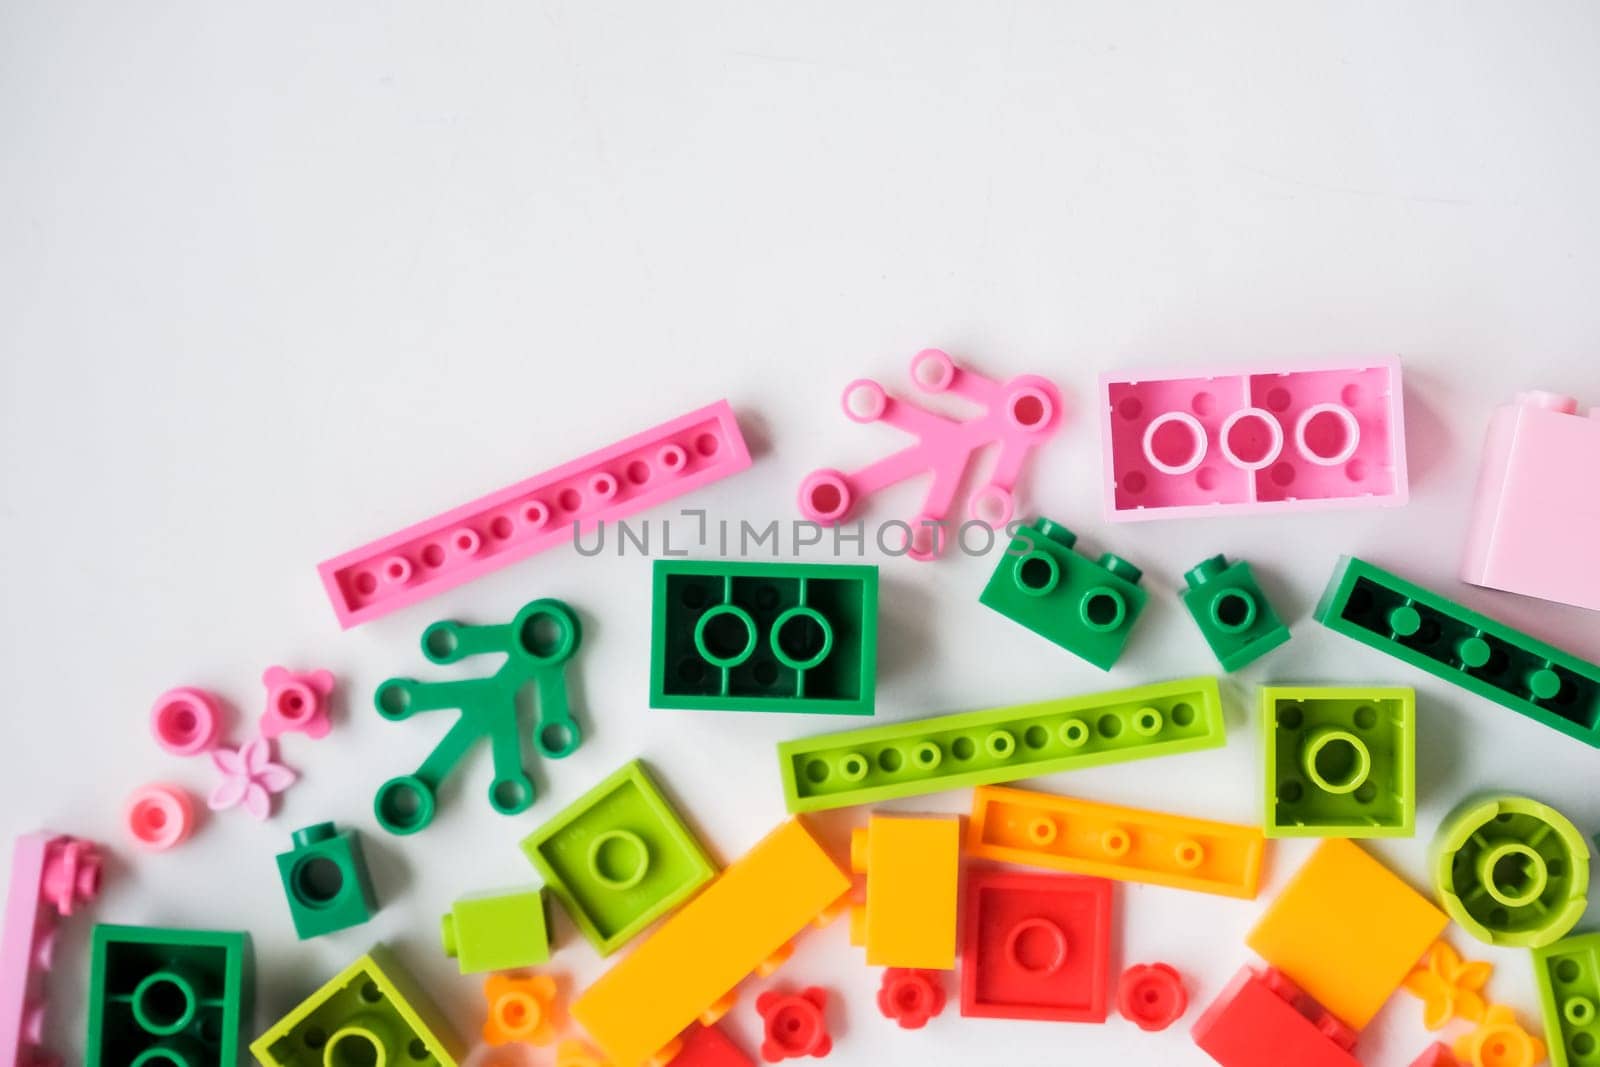 Lot of colorful rainbow toy bricks on white background. Educational toy for children. Top view with copy space. bright plastic building blocks.create and learn colors. Educational toys for creative children. by YuliaYaspe1979